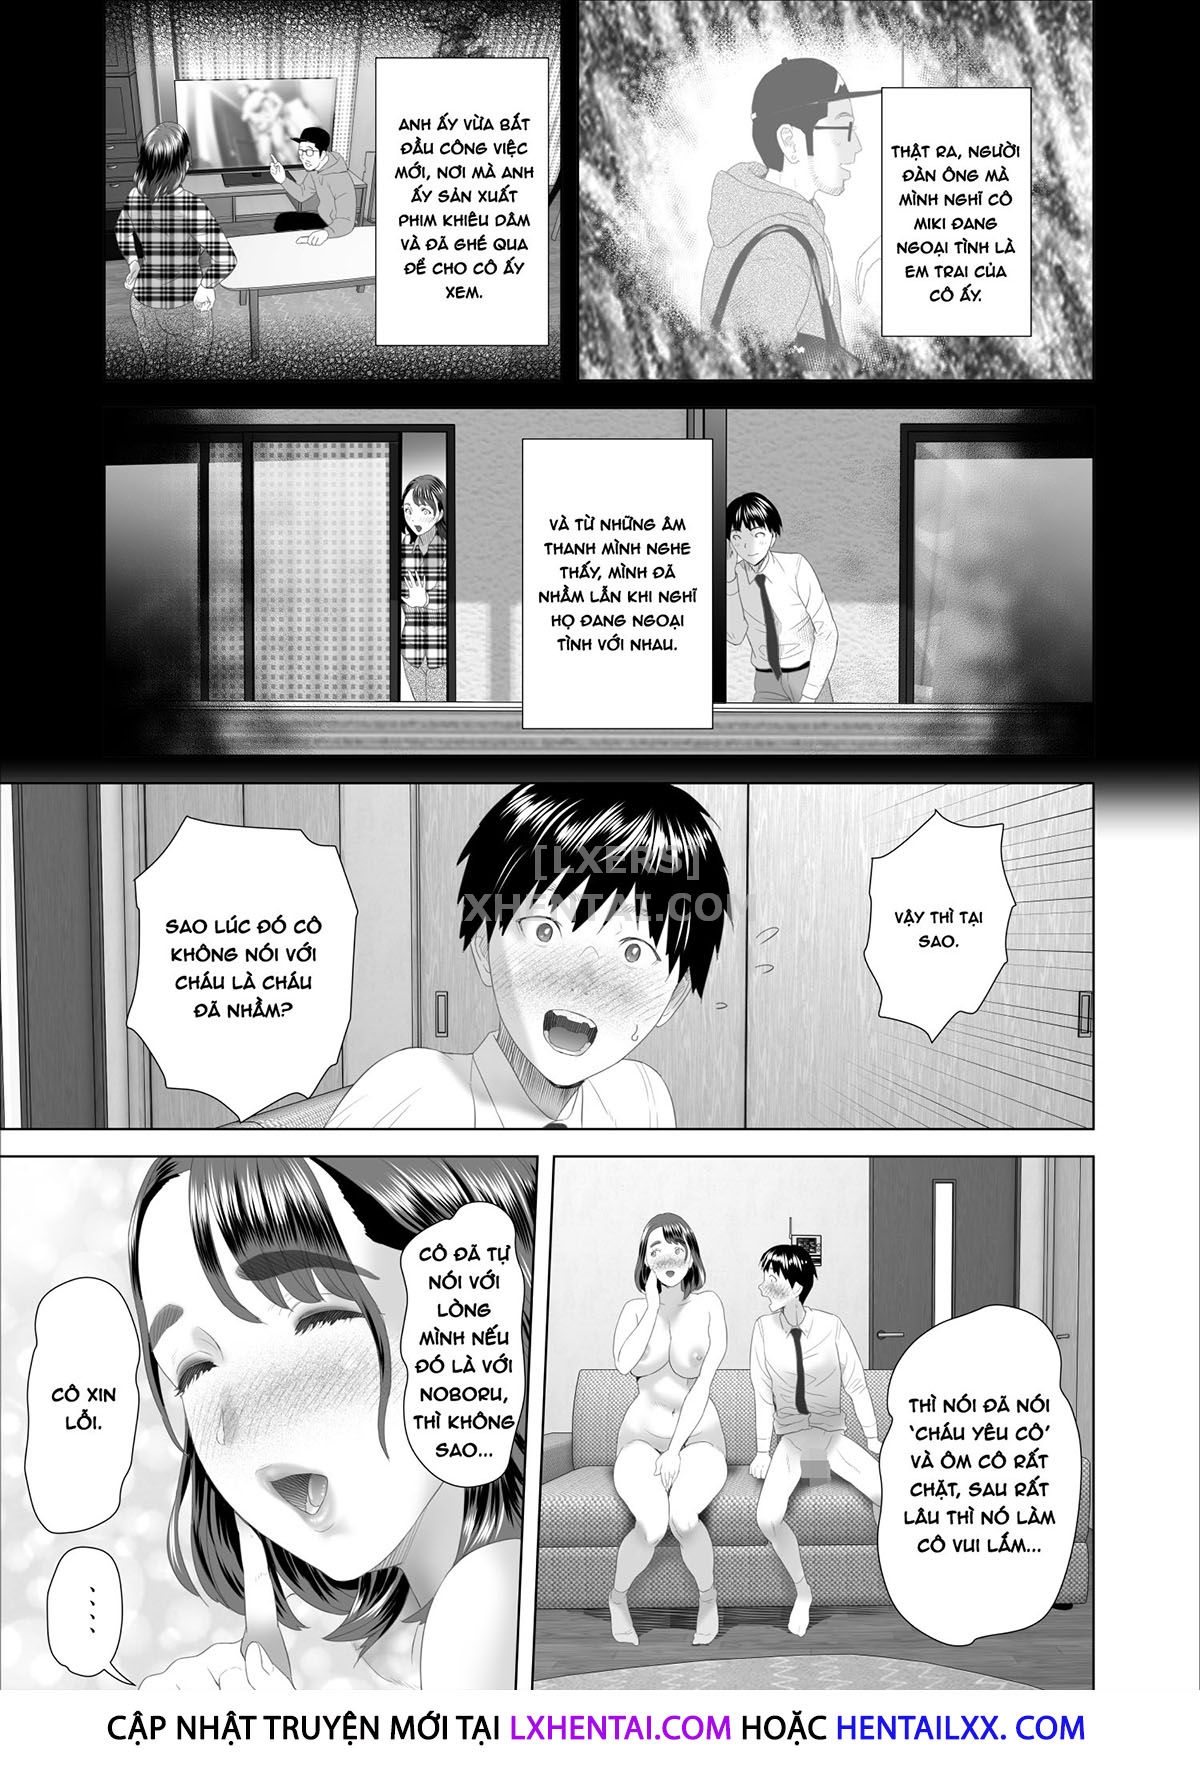 Xem ảnh Neighborhood Seduction This Is What Happened With The Mother Next Door - Chapter 1 - 162505638292_0 - Hentai24h.Tv